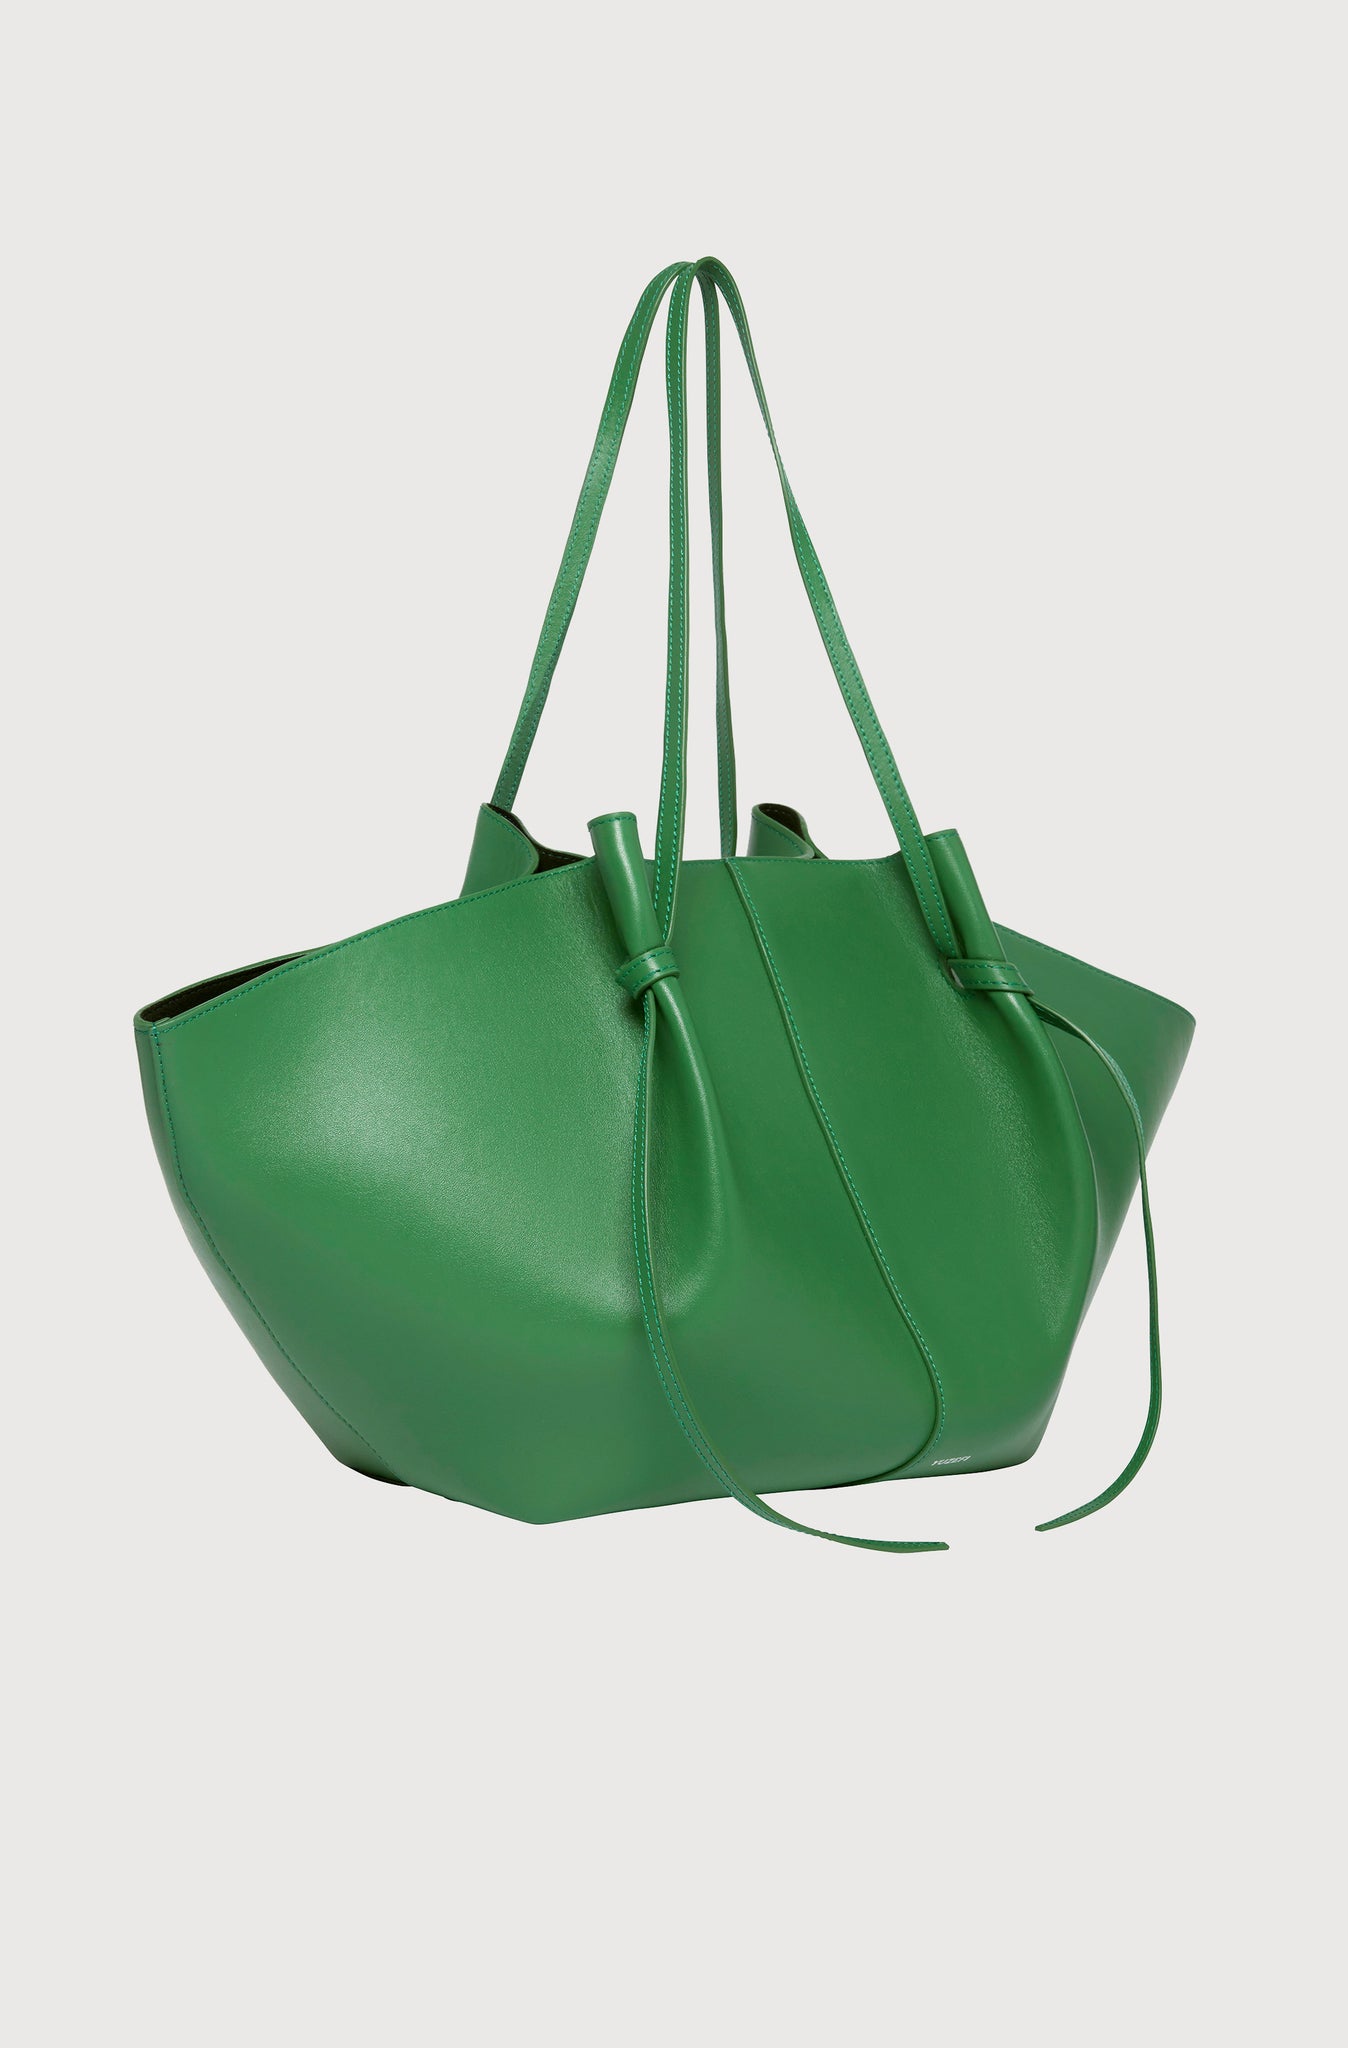 LARGE MOCHI - GREEN SMOOTH LEATHER